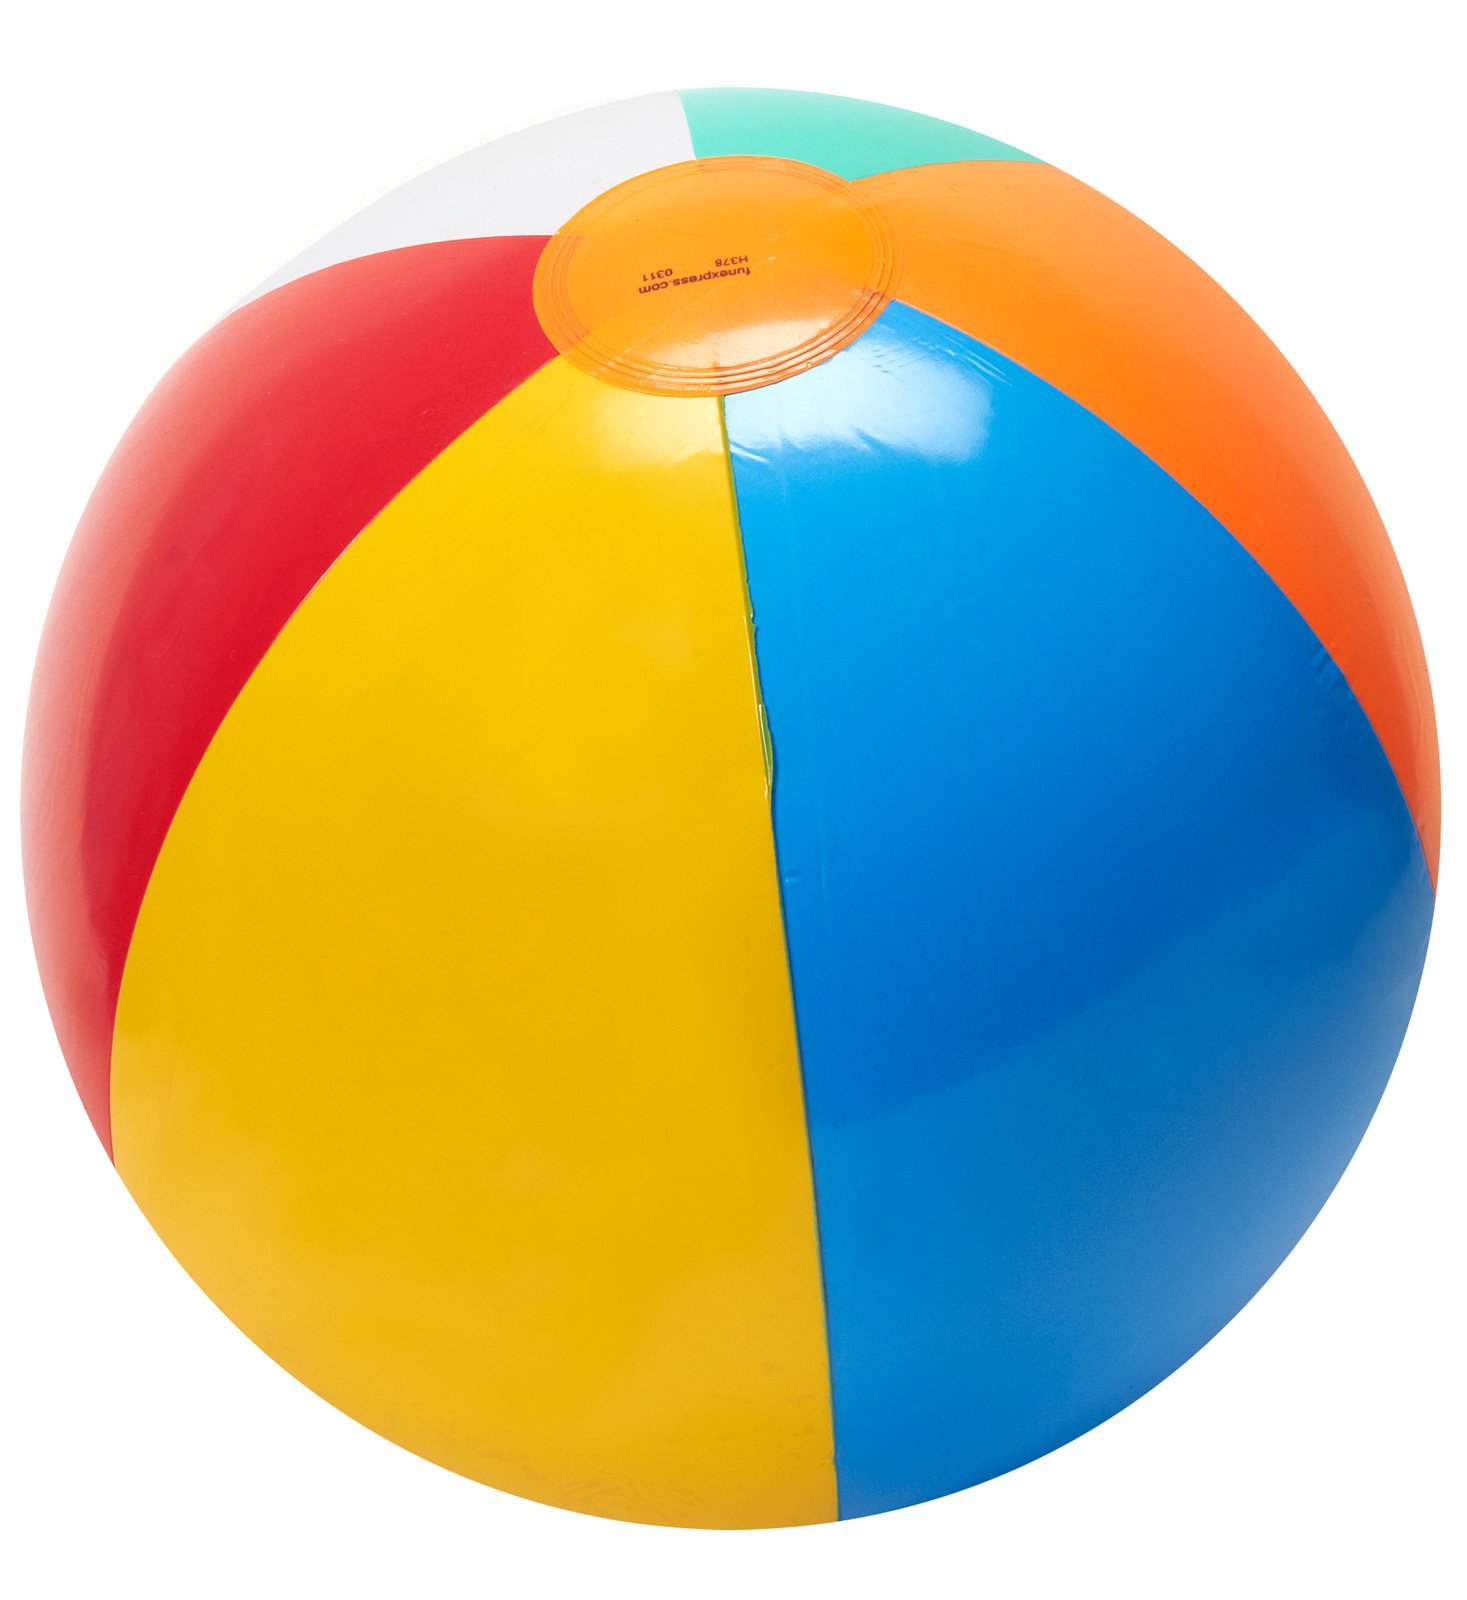 Beach Ball Picture - Clipart library